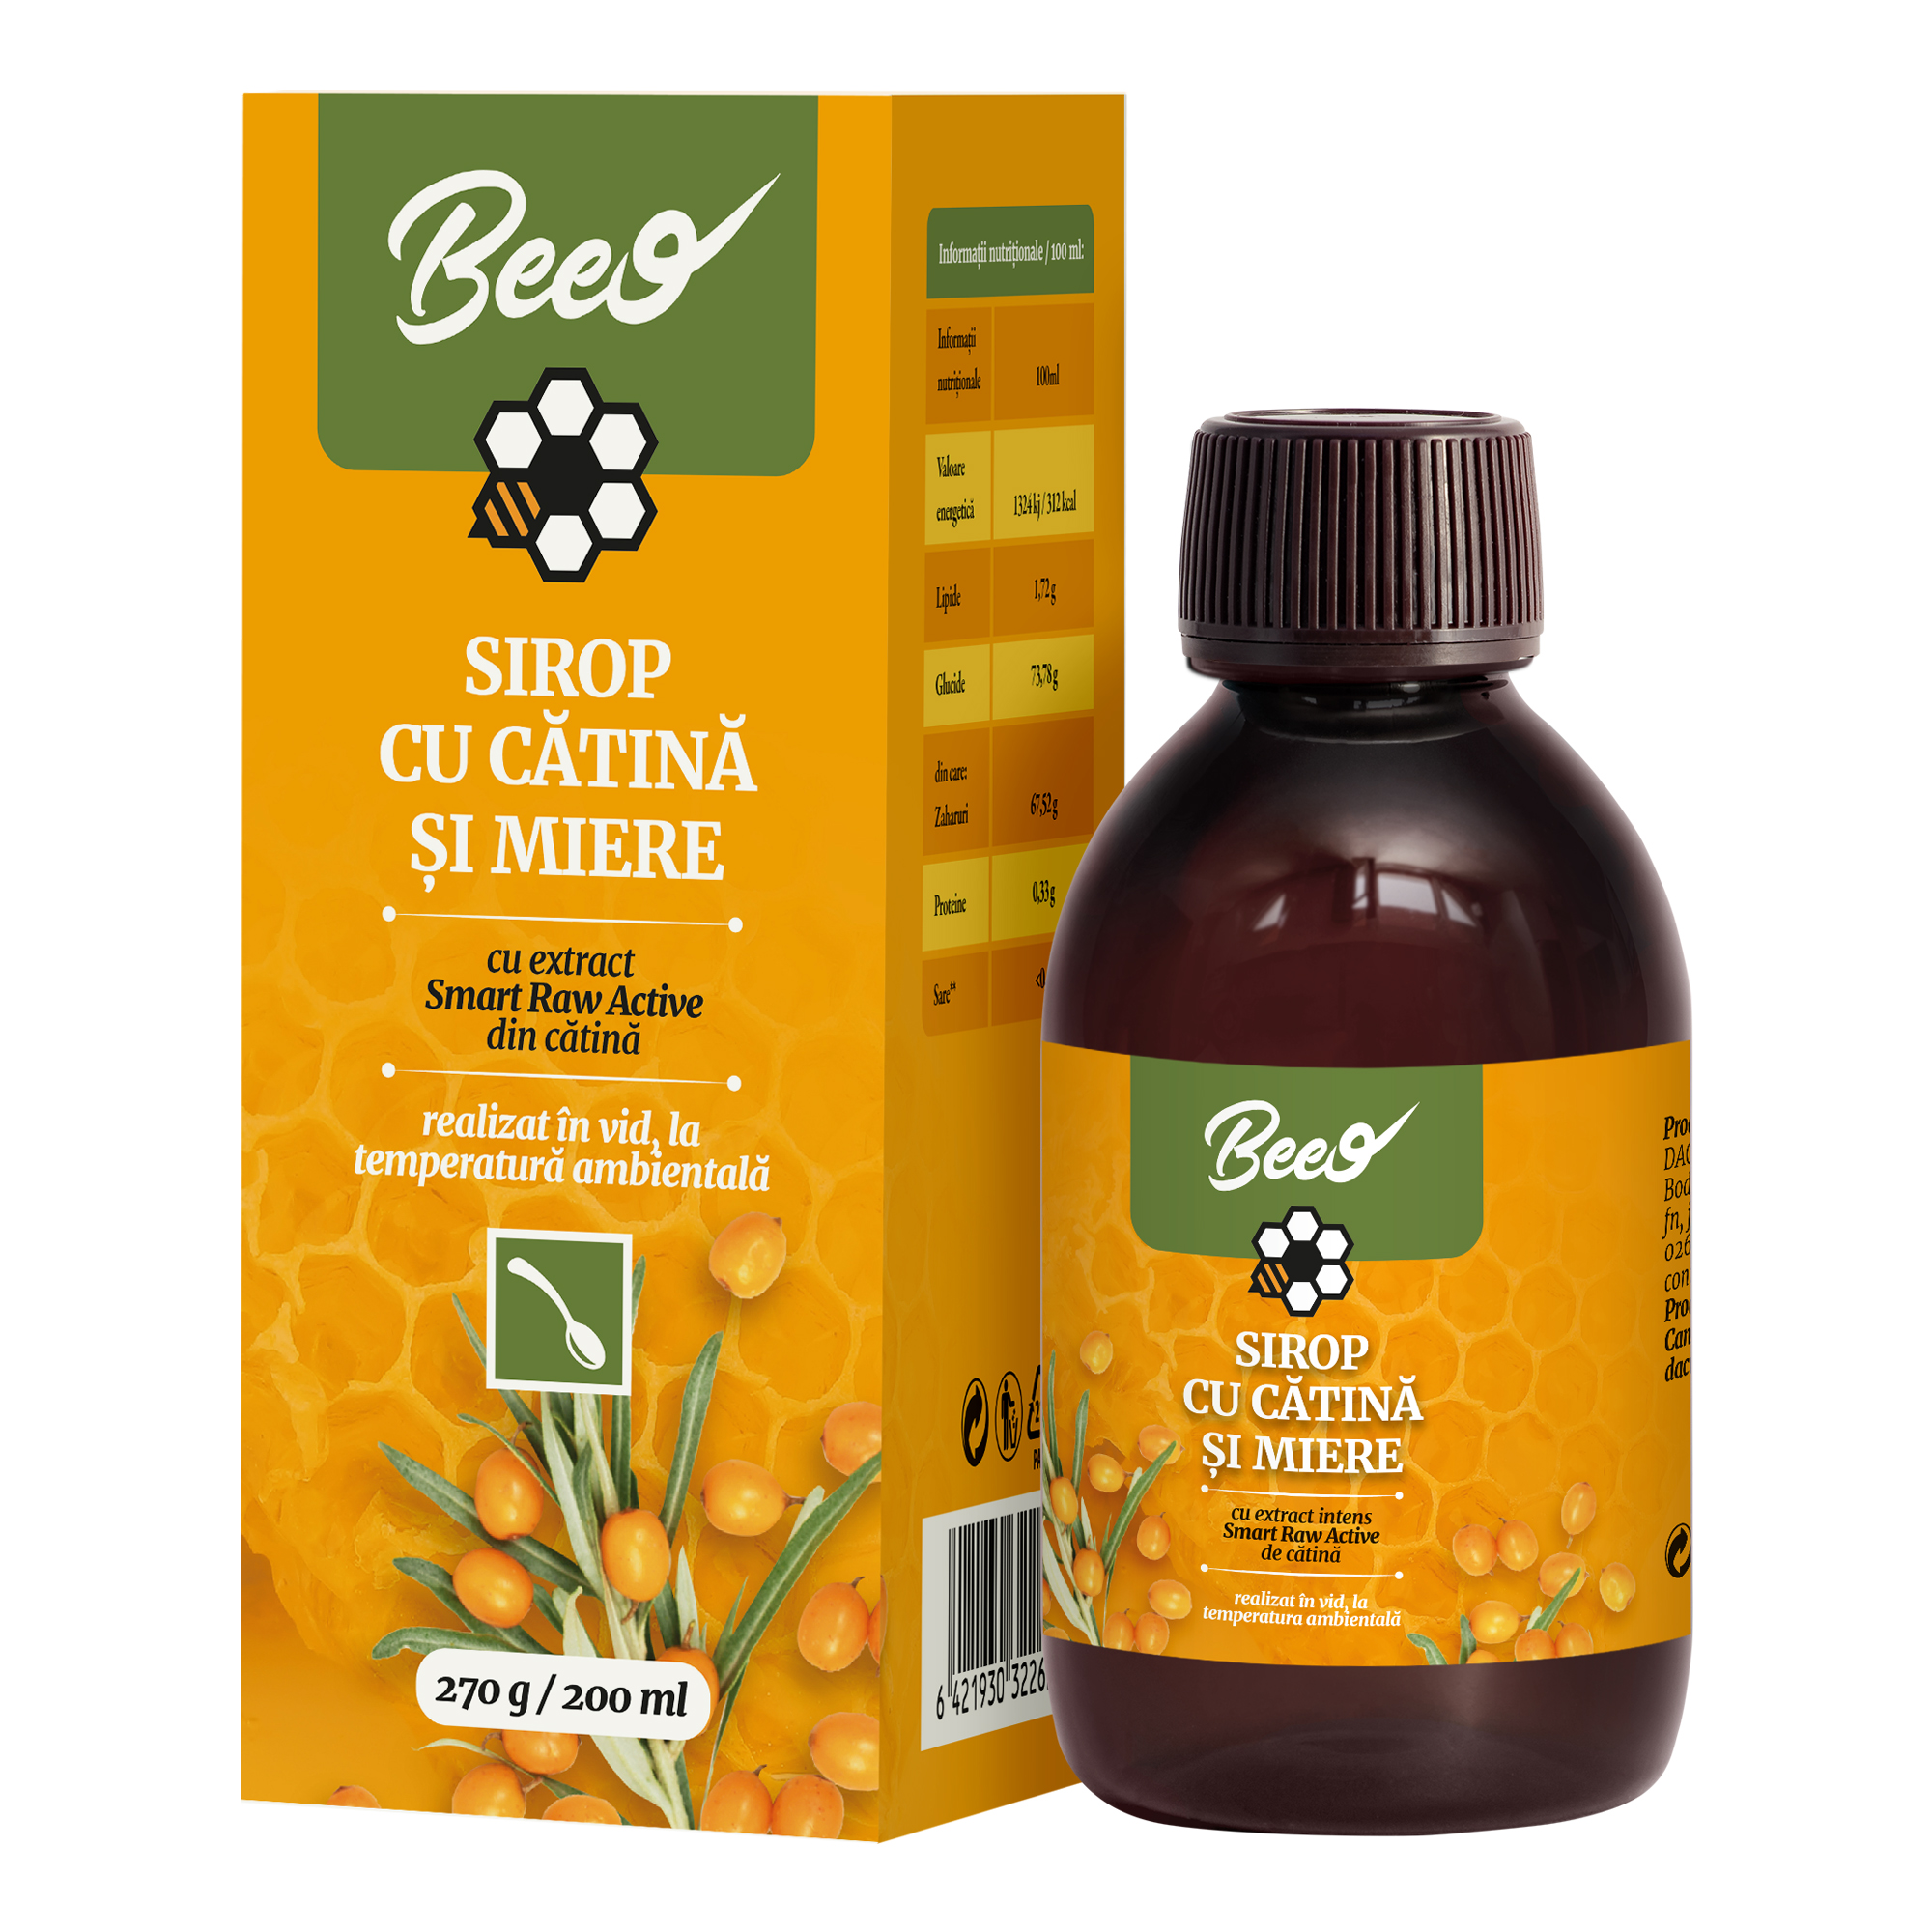 Beeo – Sirop catina si miere extract concentrat 270g Dacia Plant imagine noua